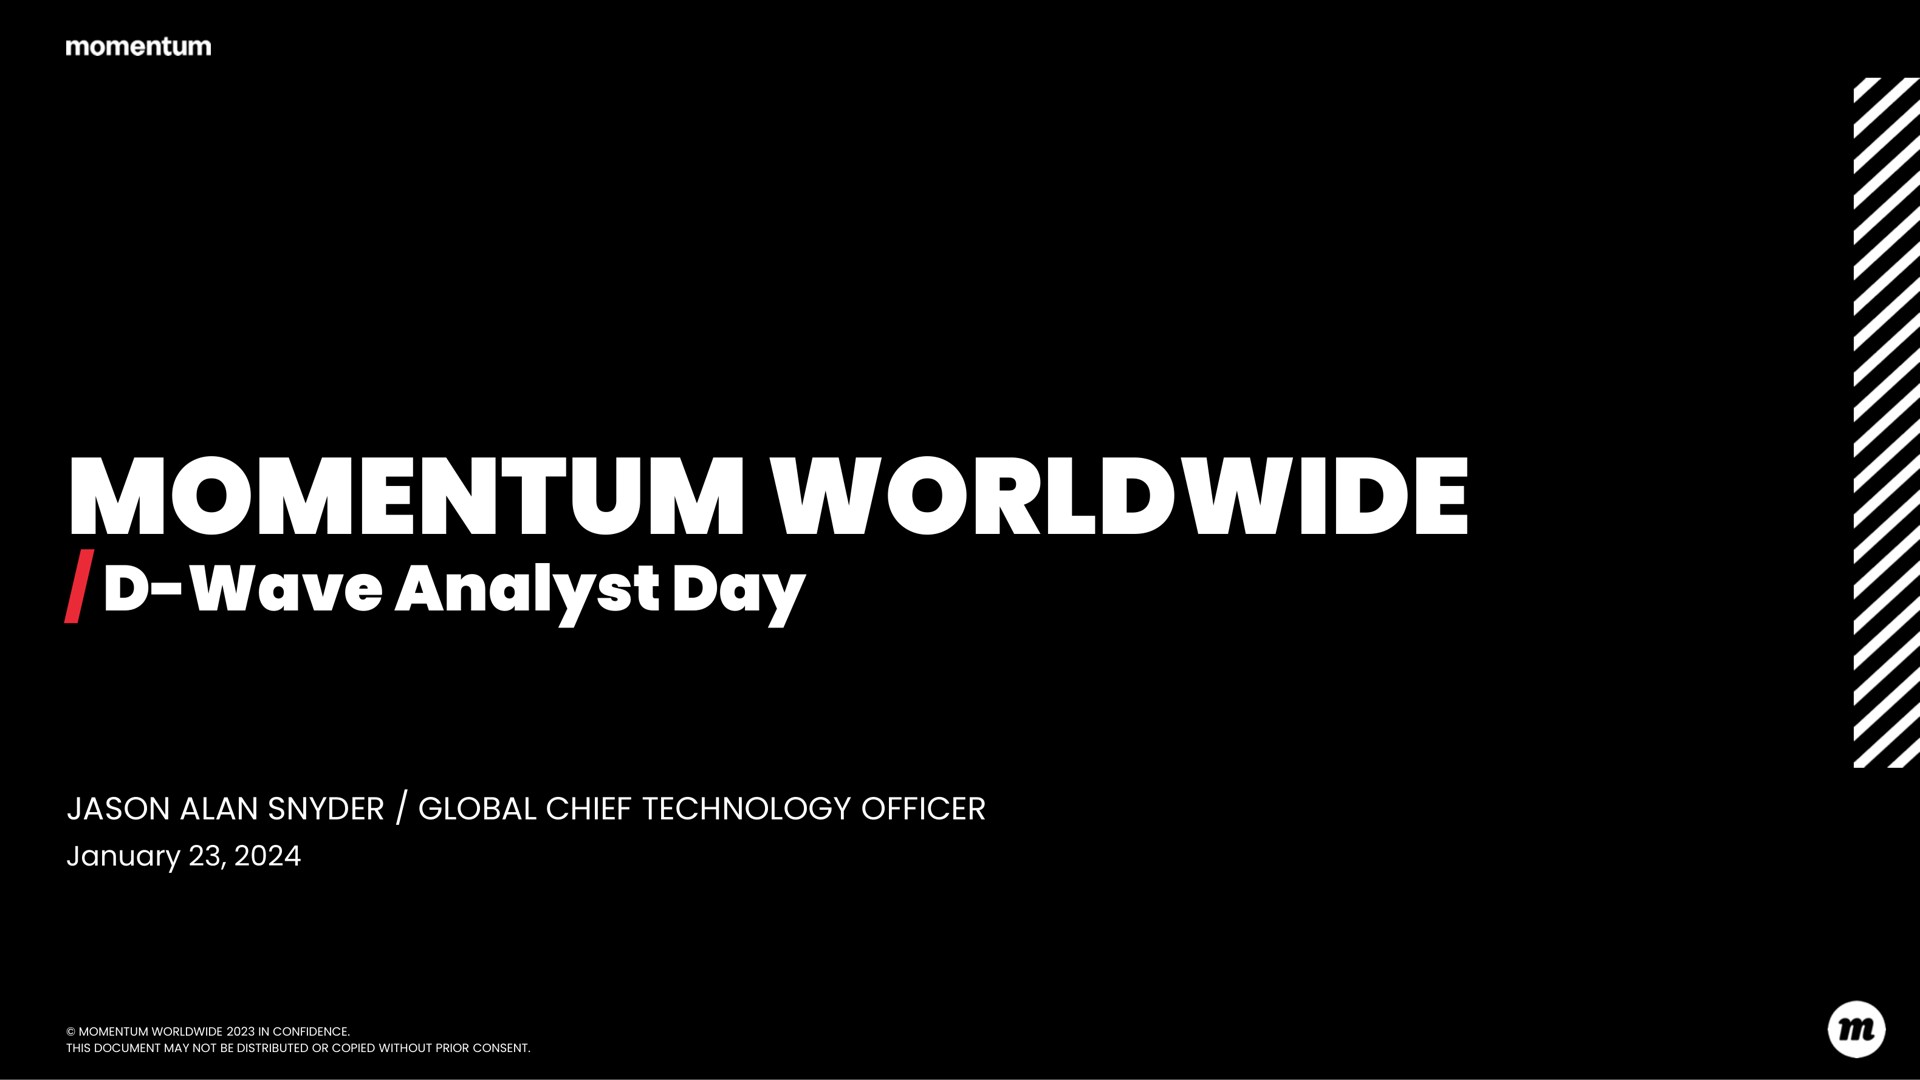 momentum wave analyst day a | D-Wave